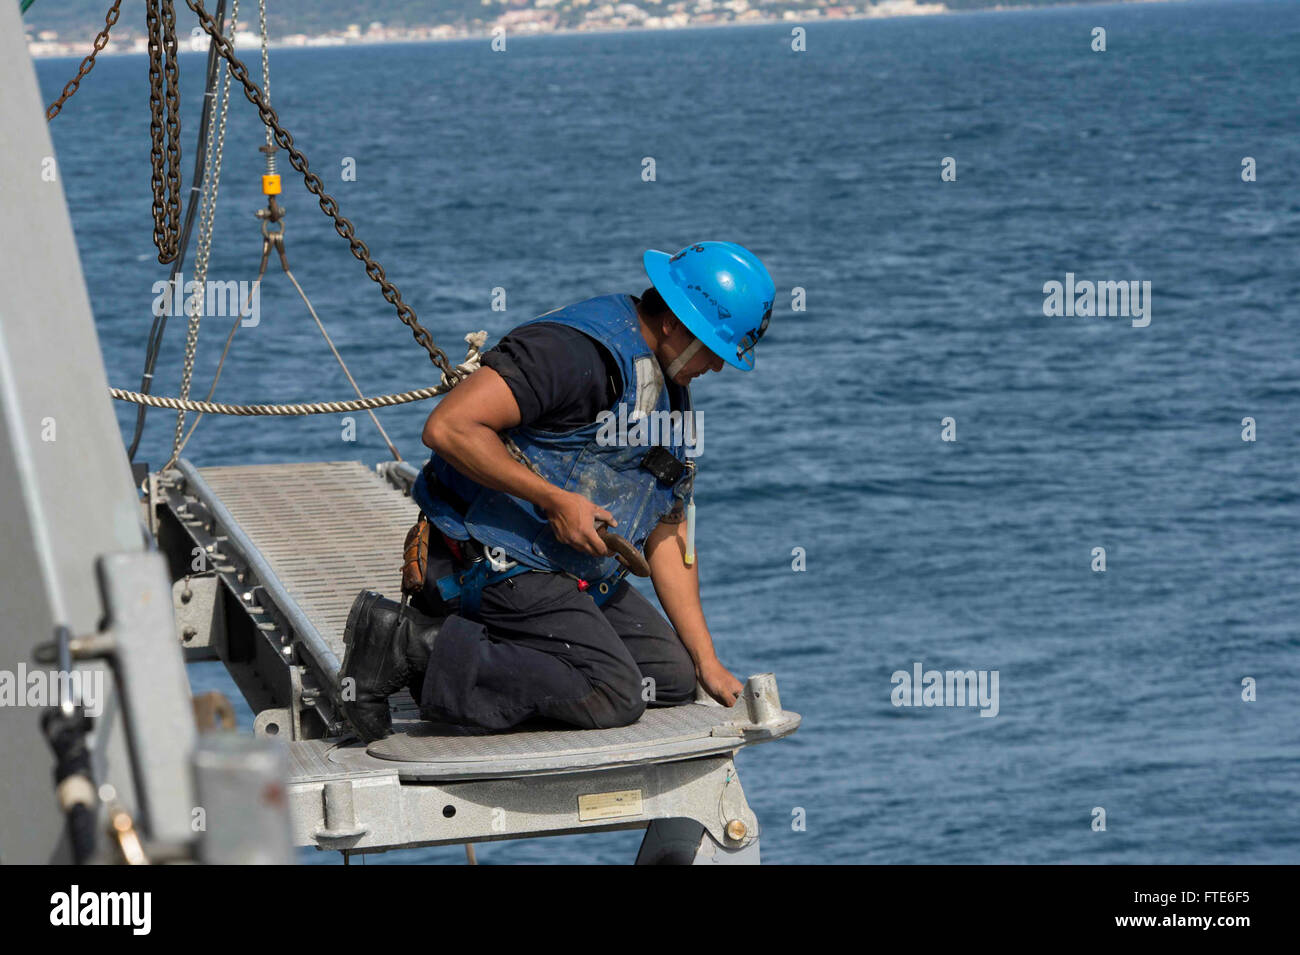 160322-N-TC720-059 CORFU, Greece (March 22, 2016) - Boatswain's Mate 2nd Class Allen Gashwytewa, from Waimanalo, Hawaii, stows the accommodation ladder aboard USS Donald Cook (DDG 75) March 22, 2016. Donald Cook, an Arleigh Burke-class guided-missile destroyer, forward deployed to Rota, Spain is conducting a routine patrol in the U.S. 6th Fleet area of operations in support of U.S. national security interests in Europe. (U.S. Navy photo by Mass Communication Specialist 2nd Class Mat Murch/Released) Stock Photo